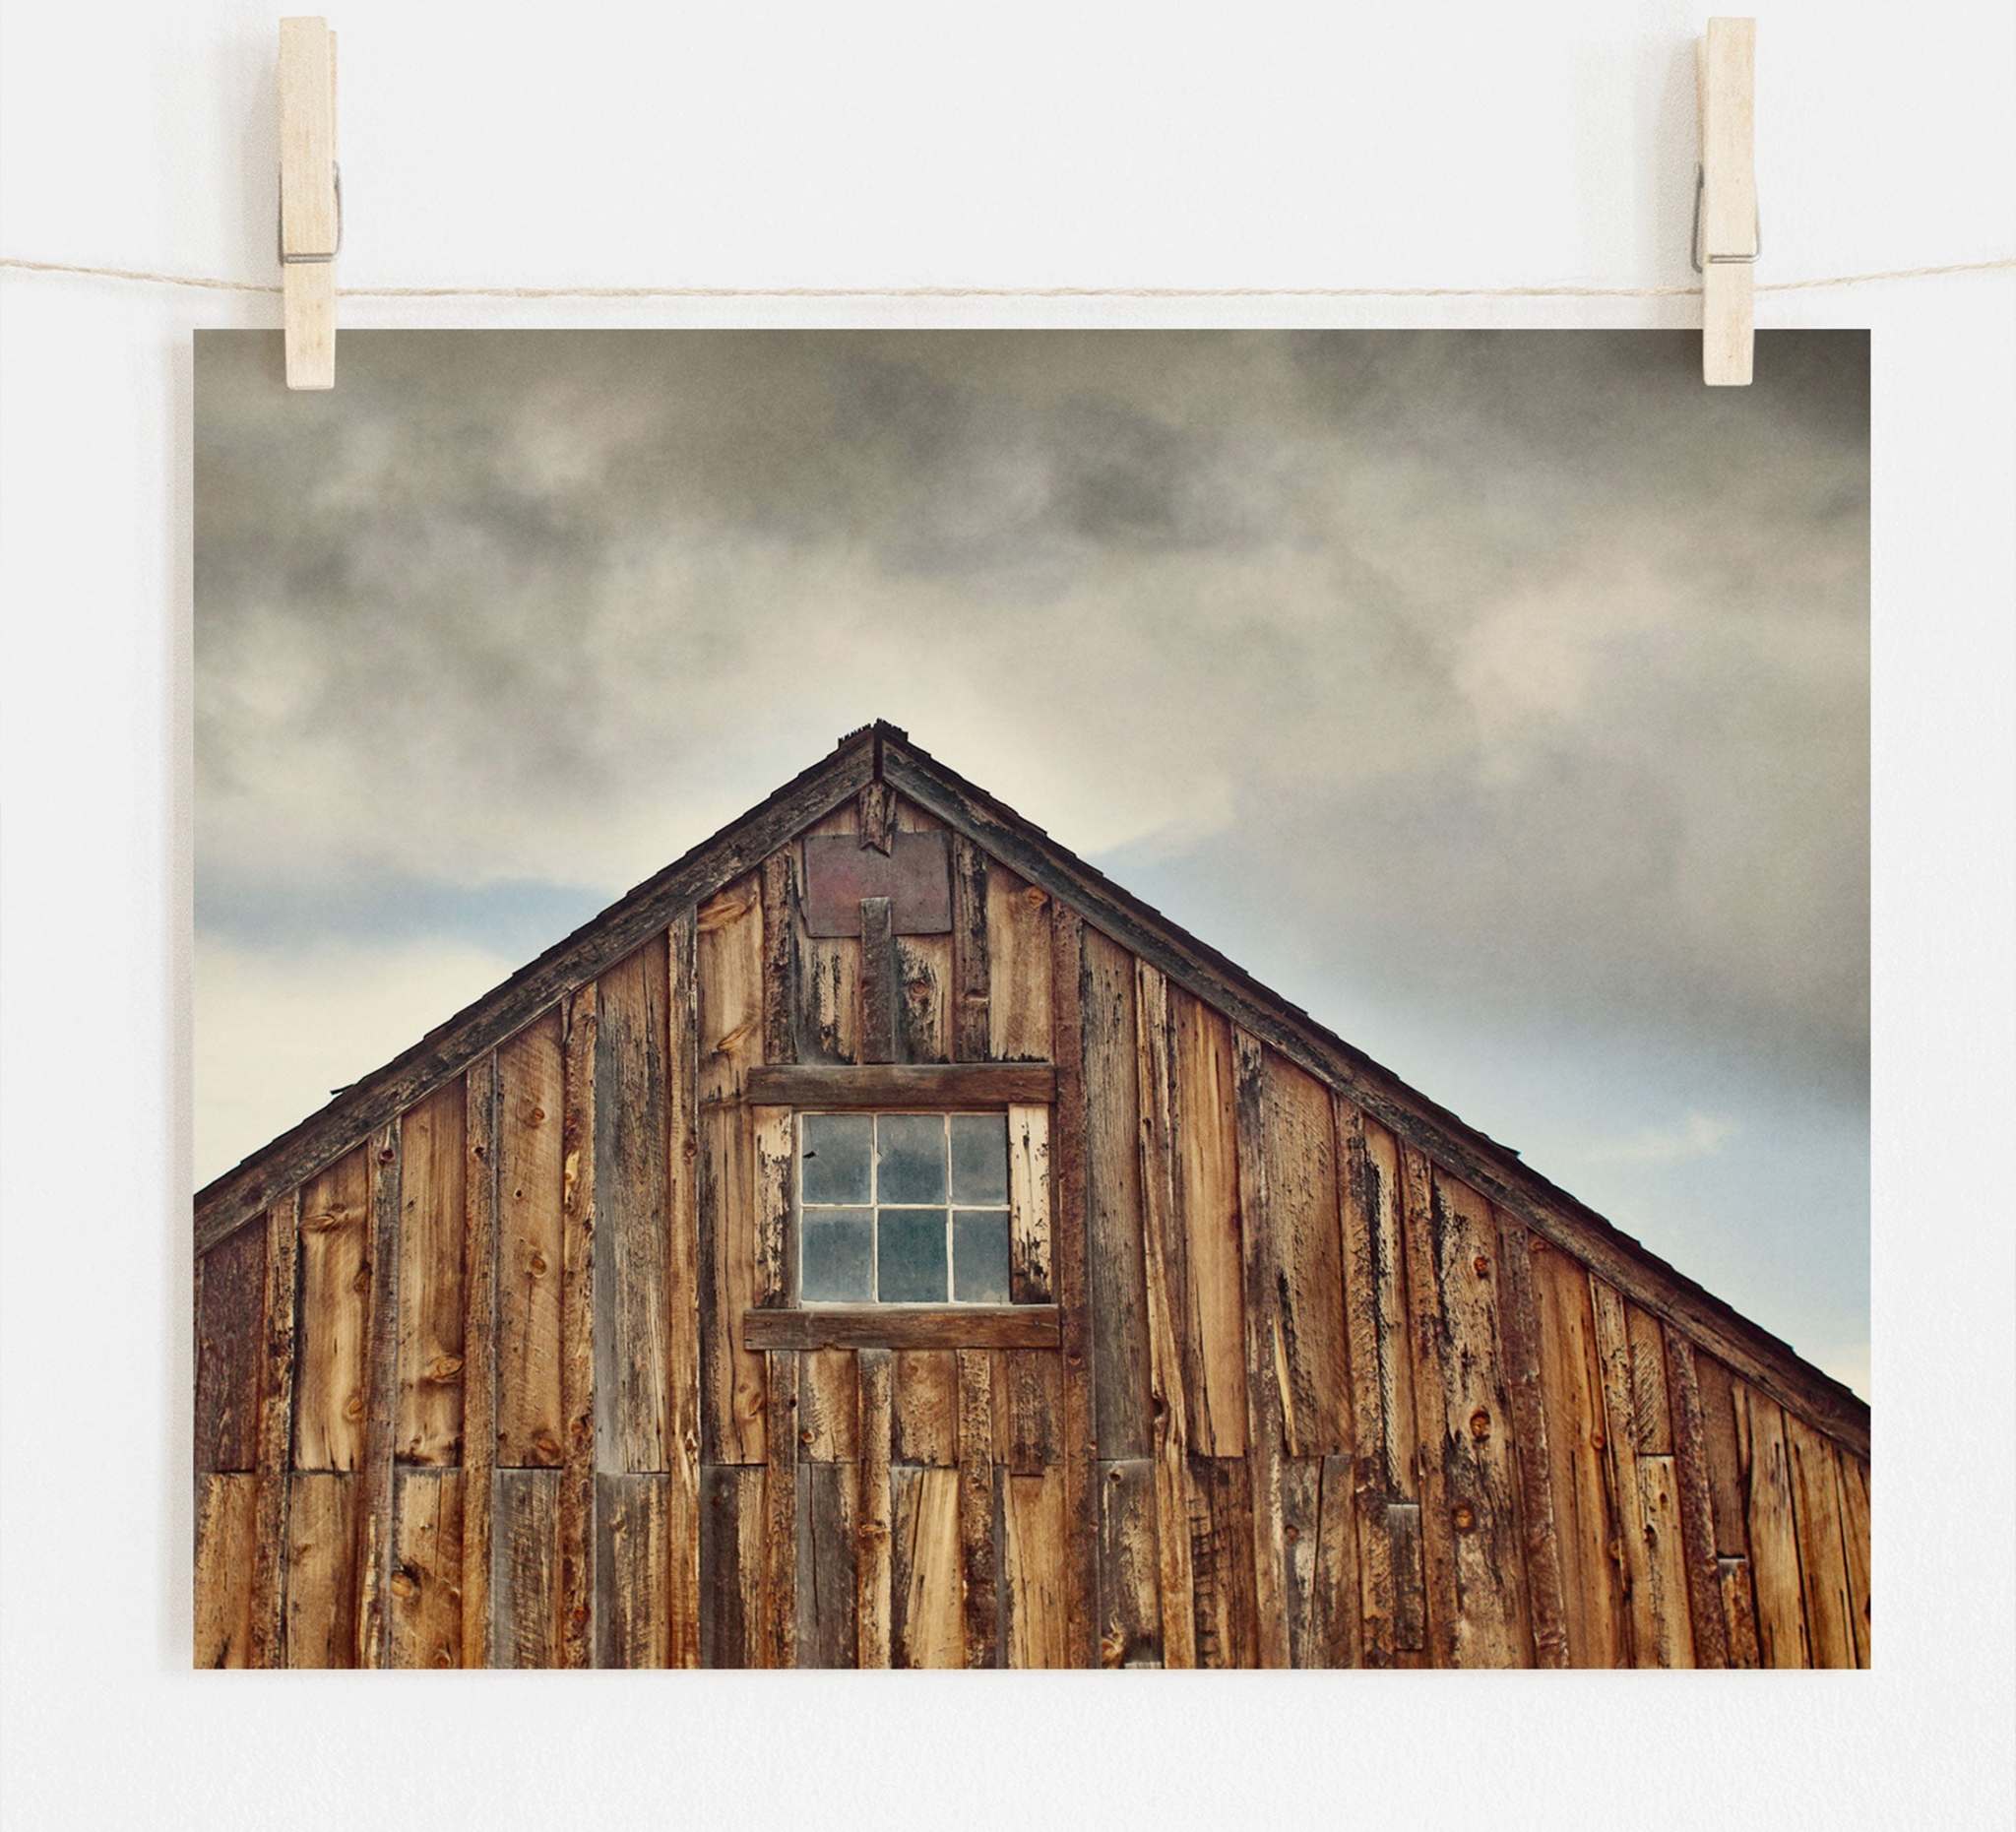 A photograph of a rustic farmhouse with a pitched roof and a single window, pinned up on white archival photographic paper by wooden clothespins. Dark clouds loom in the background. Offley Green&#39;s &#39;Old Barn at Bodie&#39; Farmhouse Rustic Print is a stunning addition to any decor.